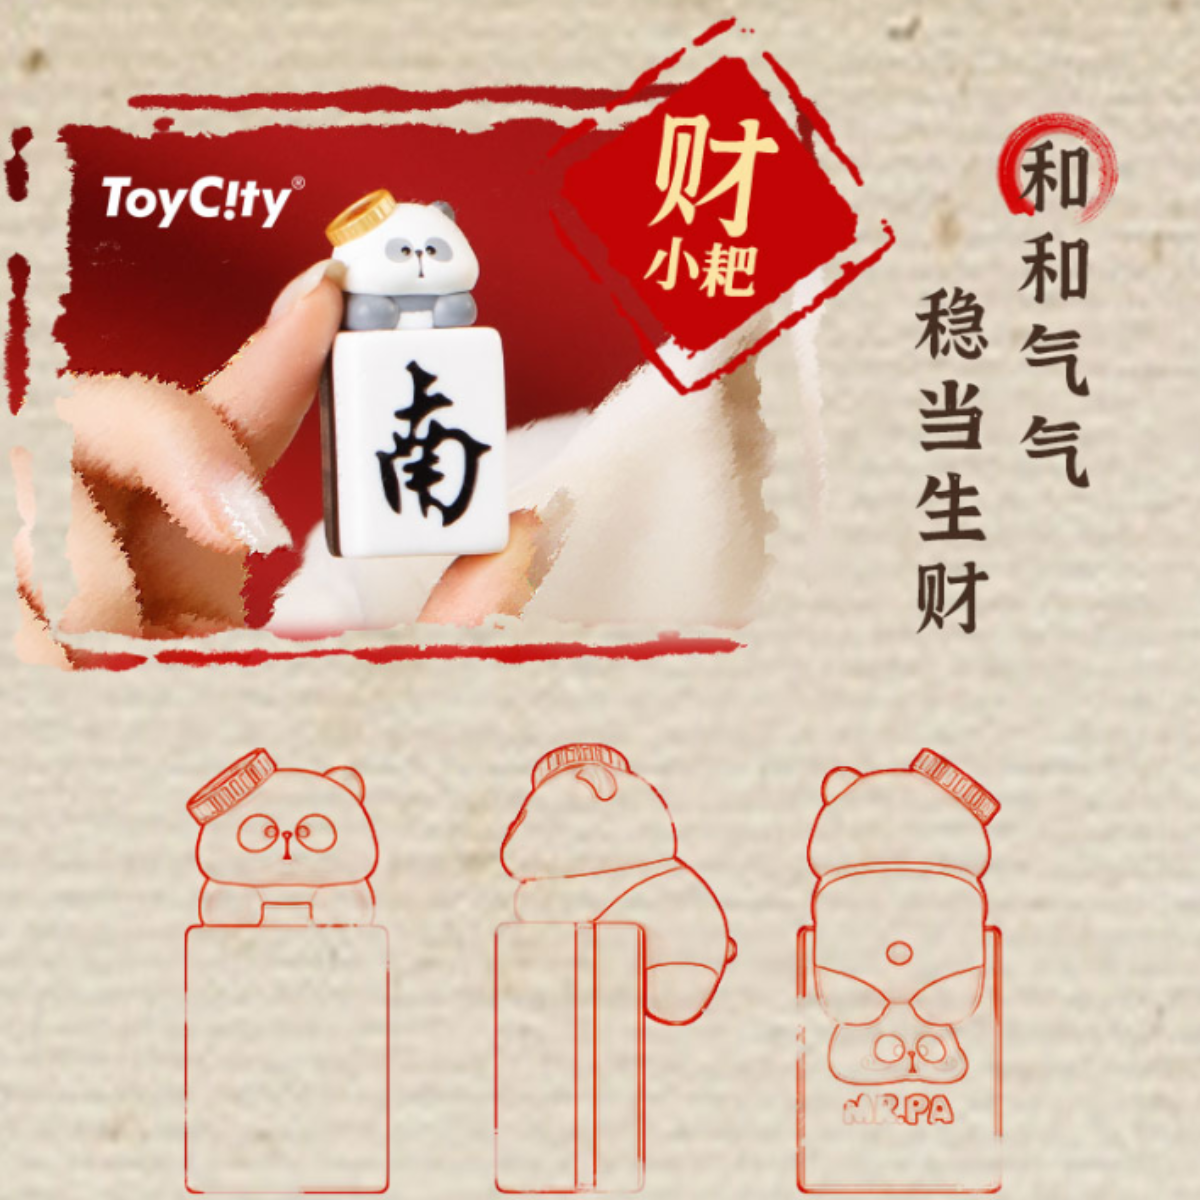 ToyCity x Mr.Pa Small Pa Waiting For The Tile Mahjong Series-Single Box (Random)-toycity-Ace Cards &amp; Collectibles